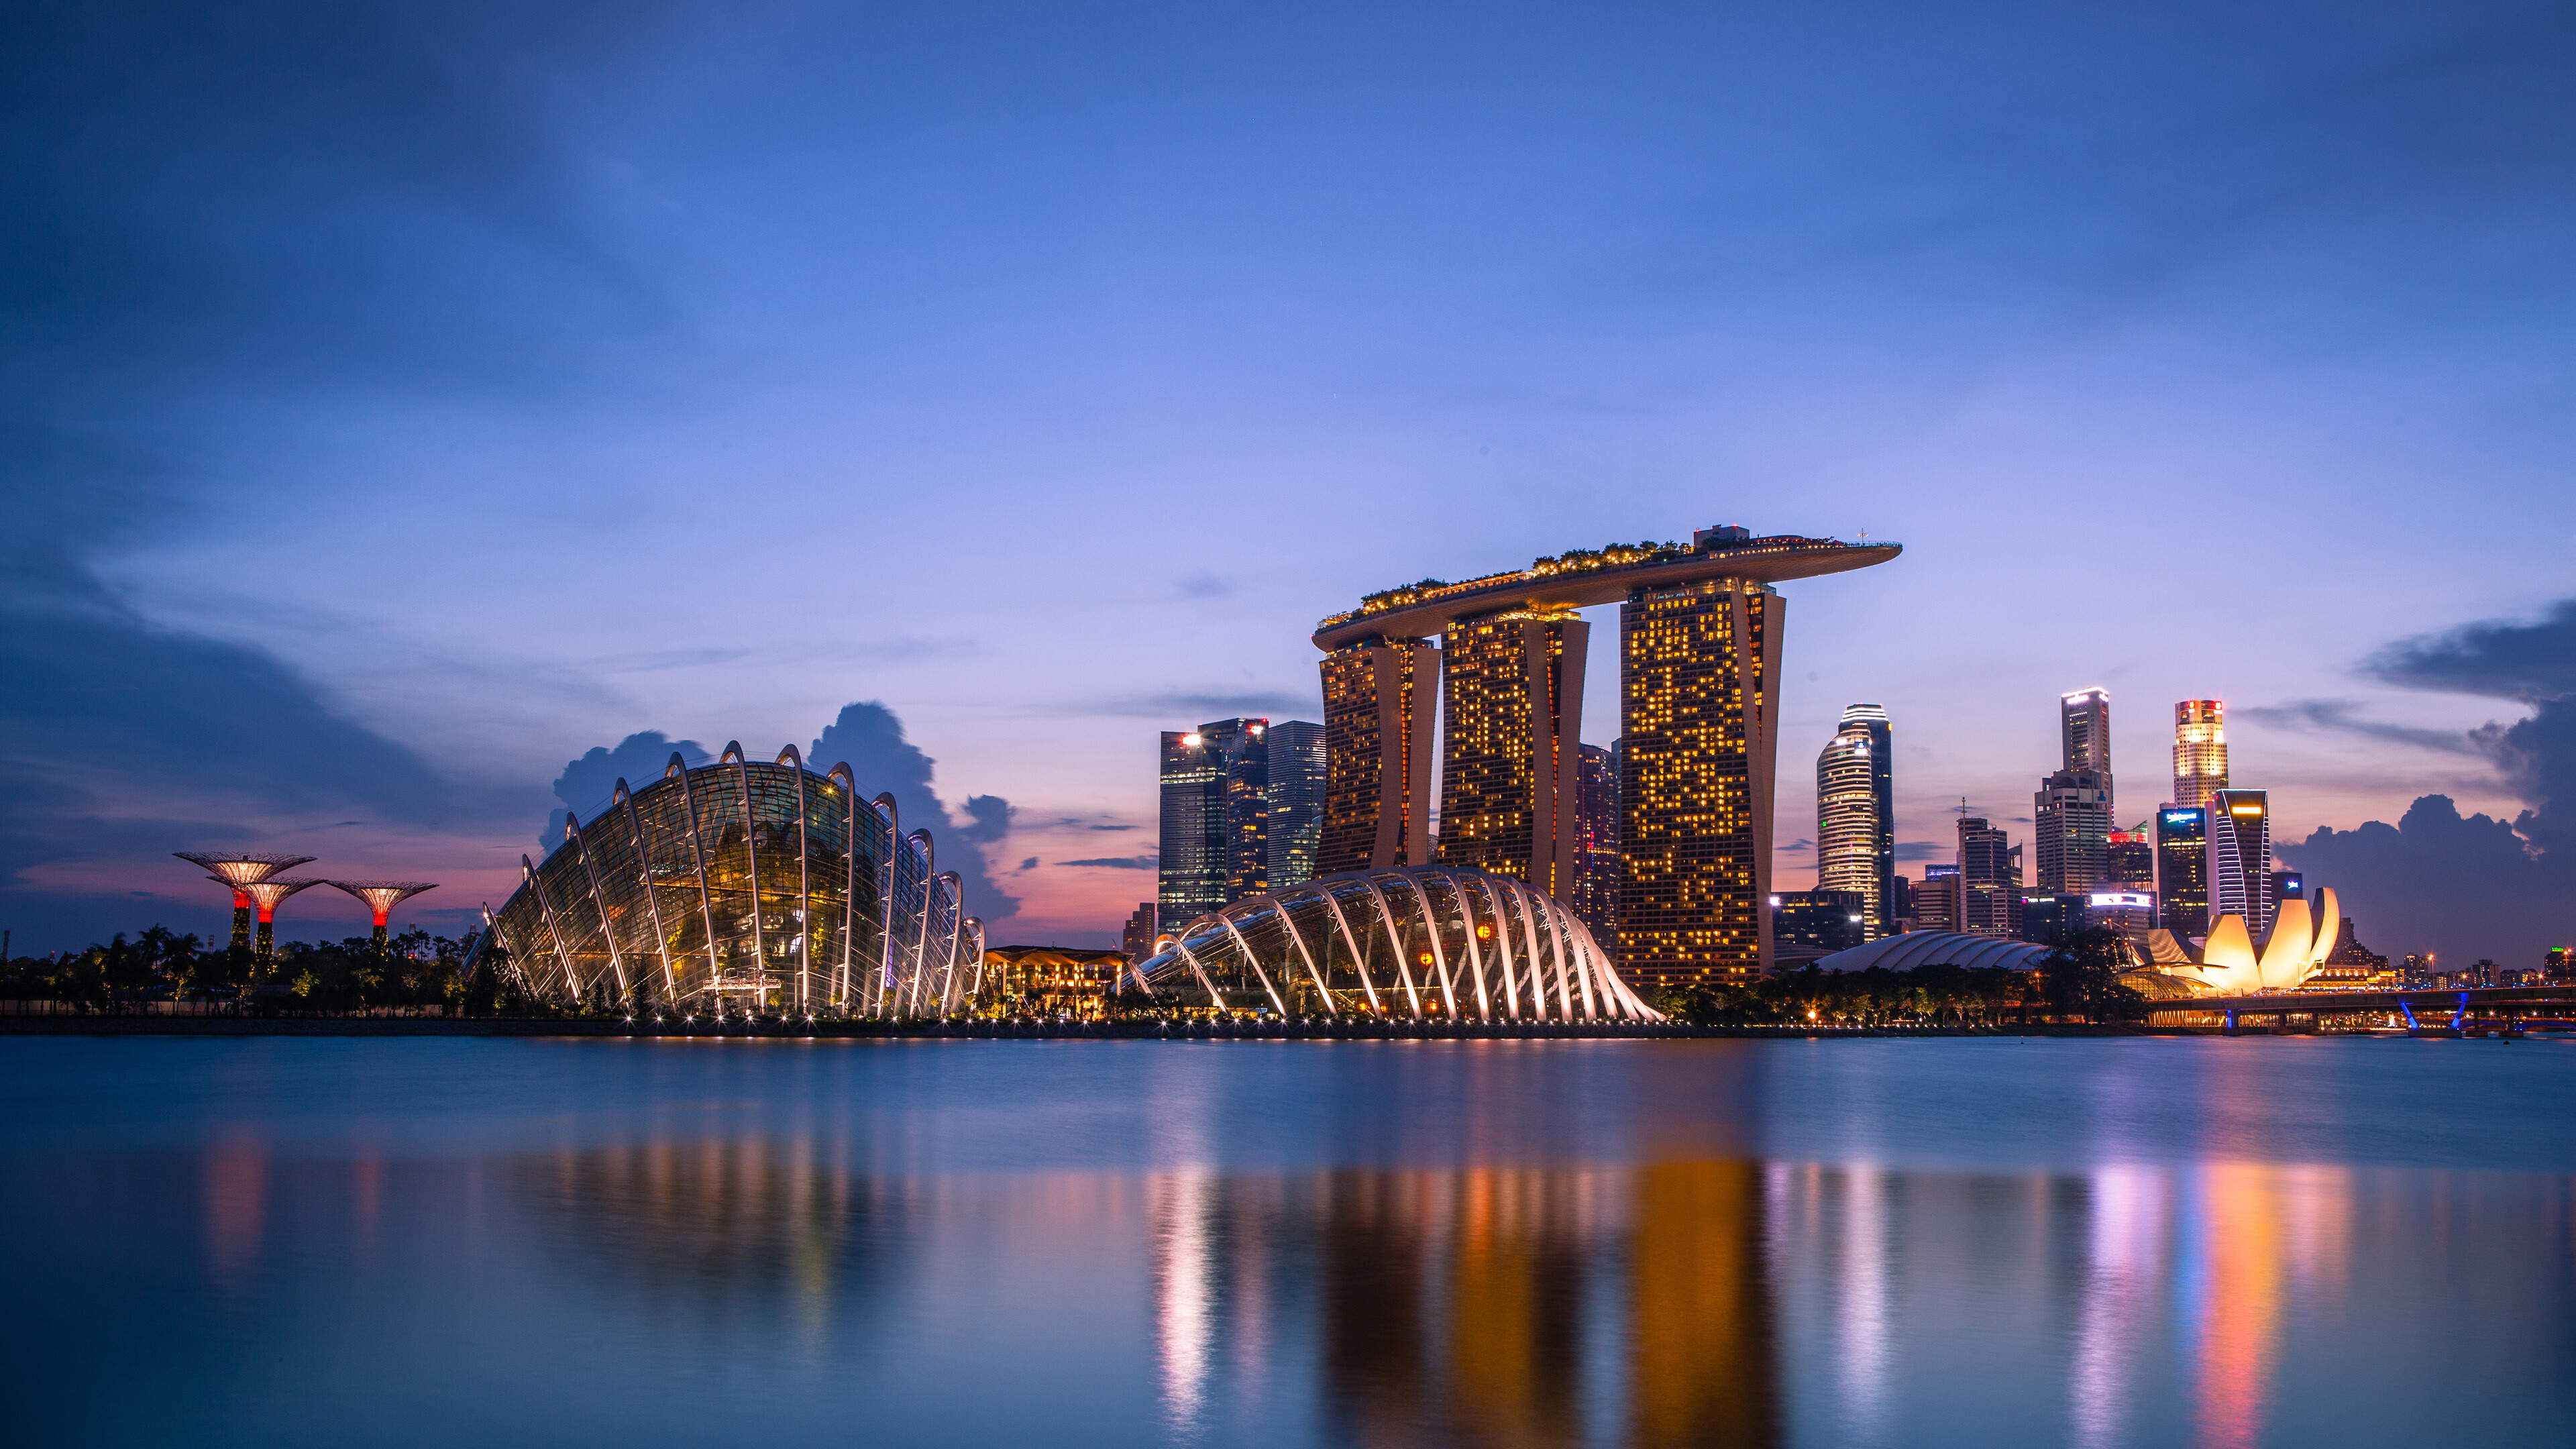 Singapore: A city-state located at the southern tip of the Malay Peninsula. 3840x2160 4K Wallpaper.